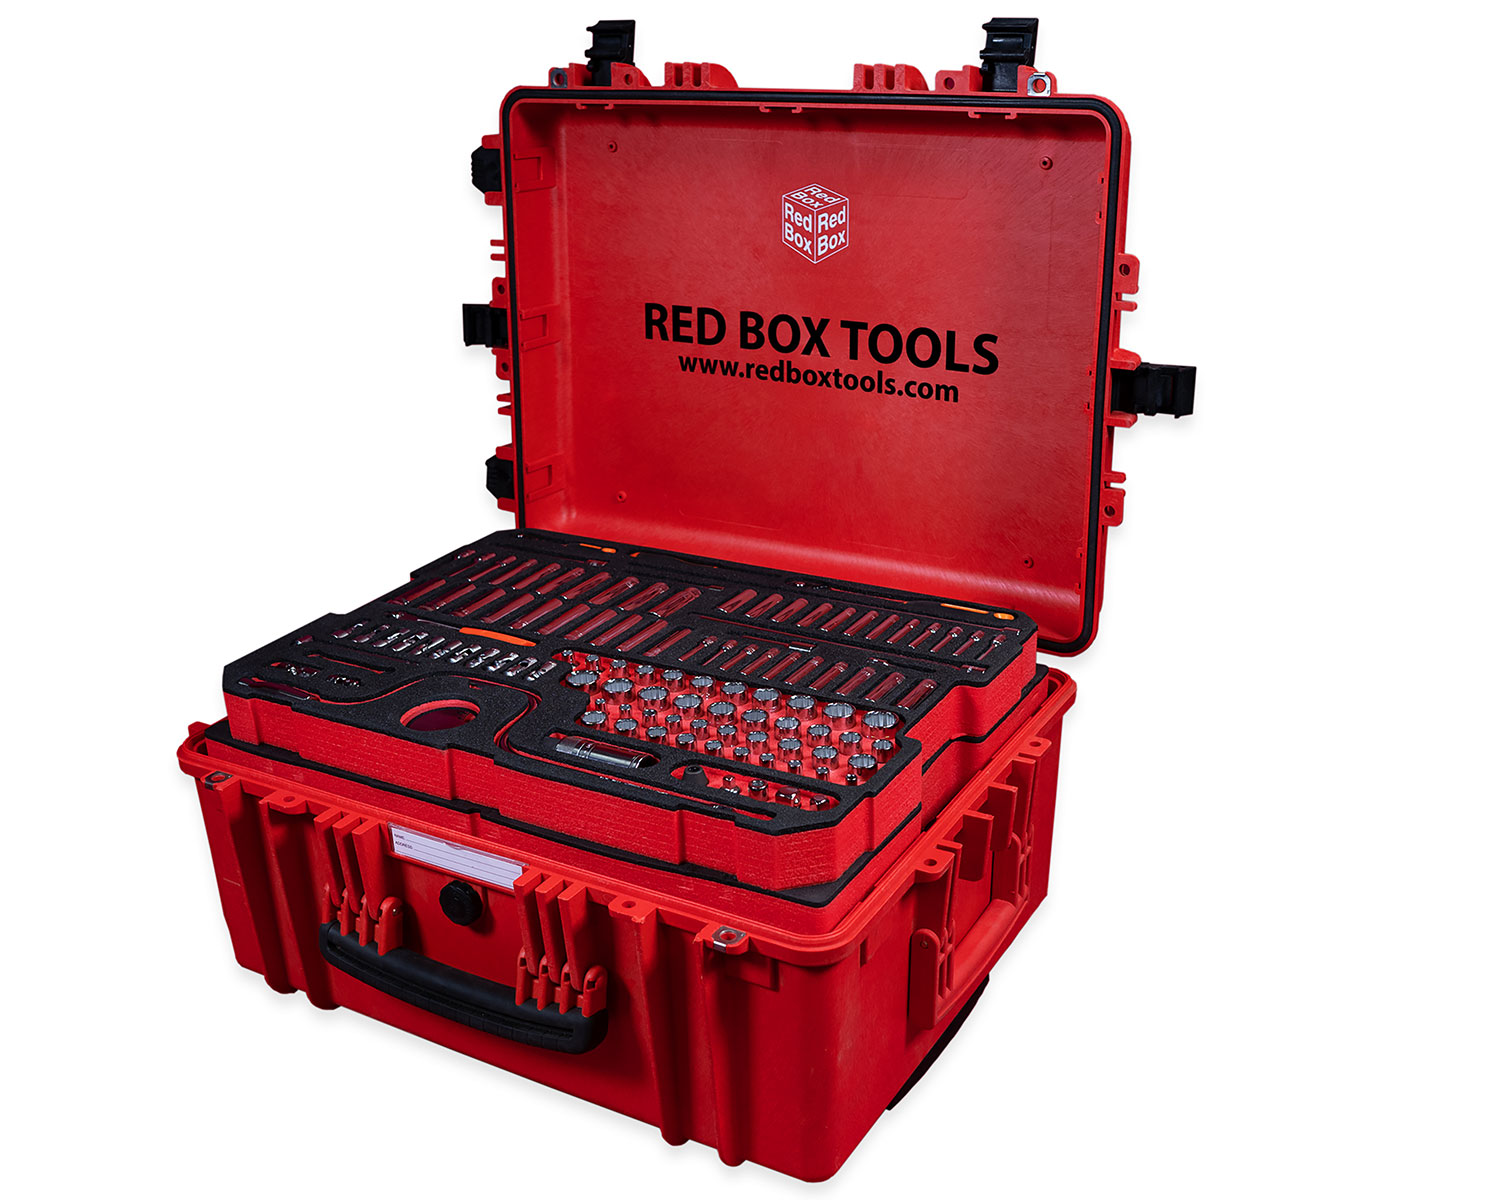 Helibox Trolley Case with Tools Red spare and - RBI8000ST® Tools Box - foam